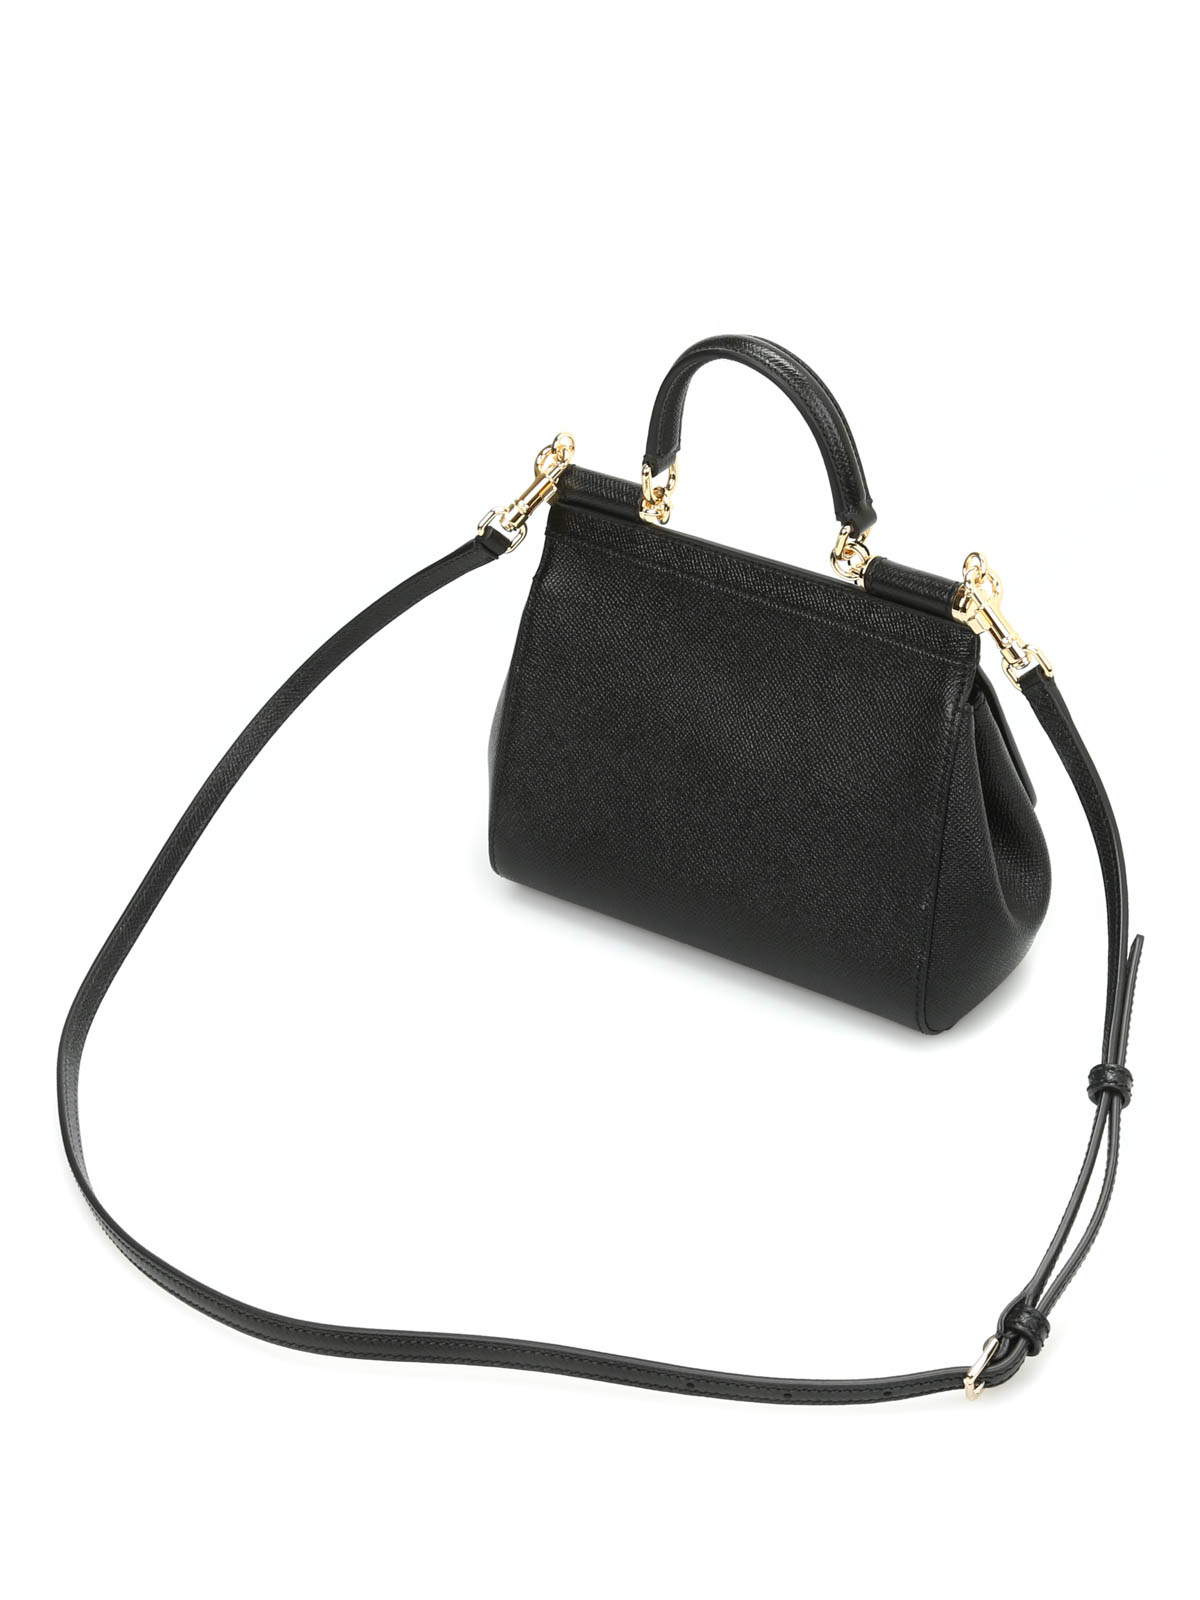 Dolce & Gabbana Small Sicily Leather Bag